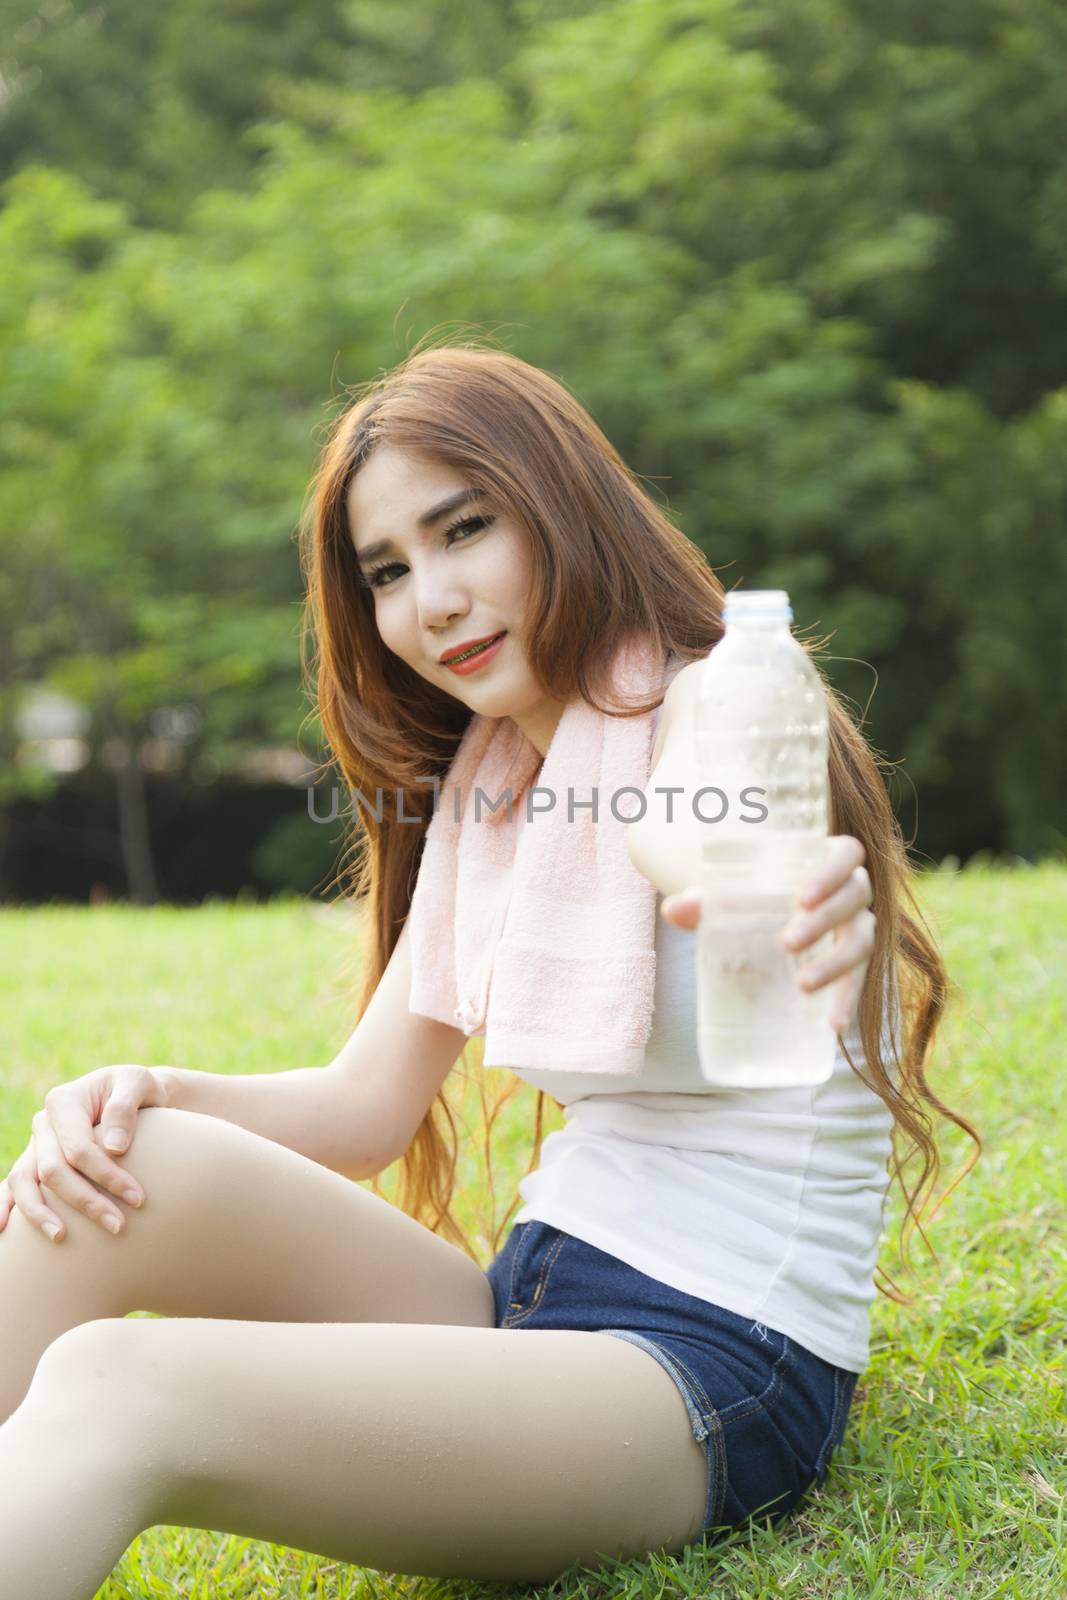 Woman pouring water from it. Sitting On the lawn in the park.